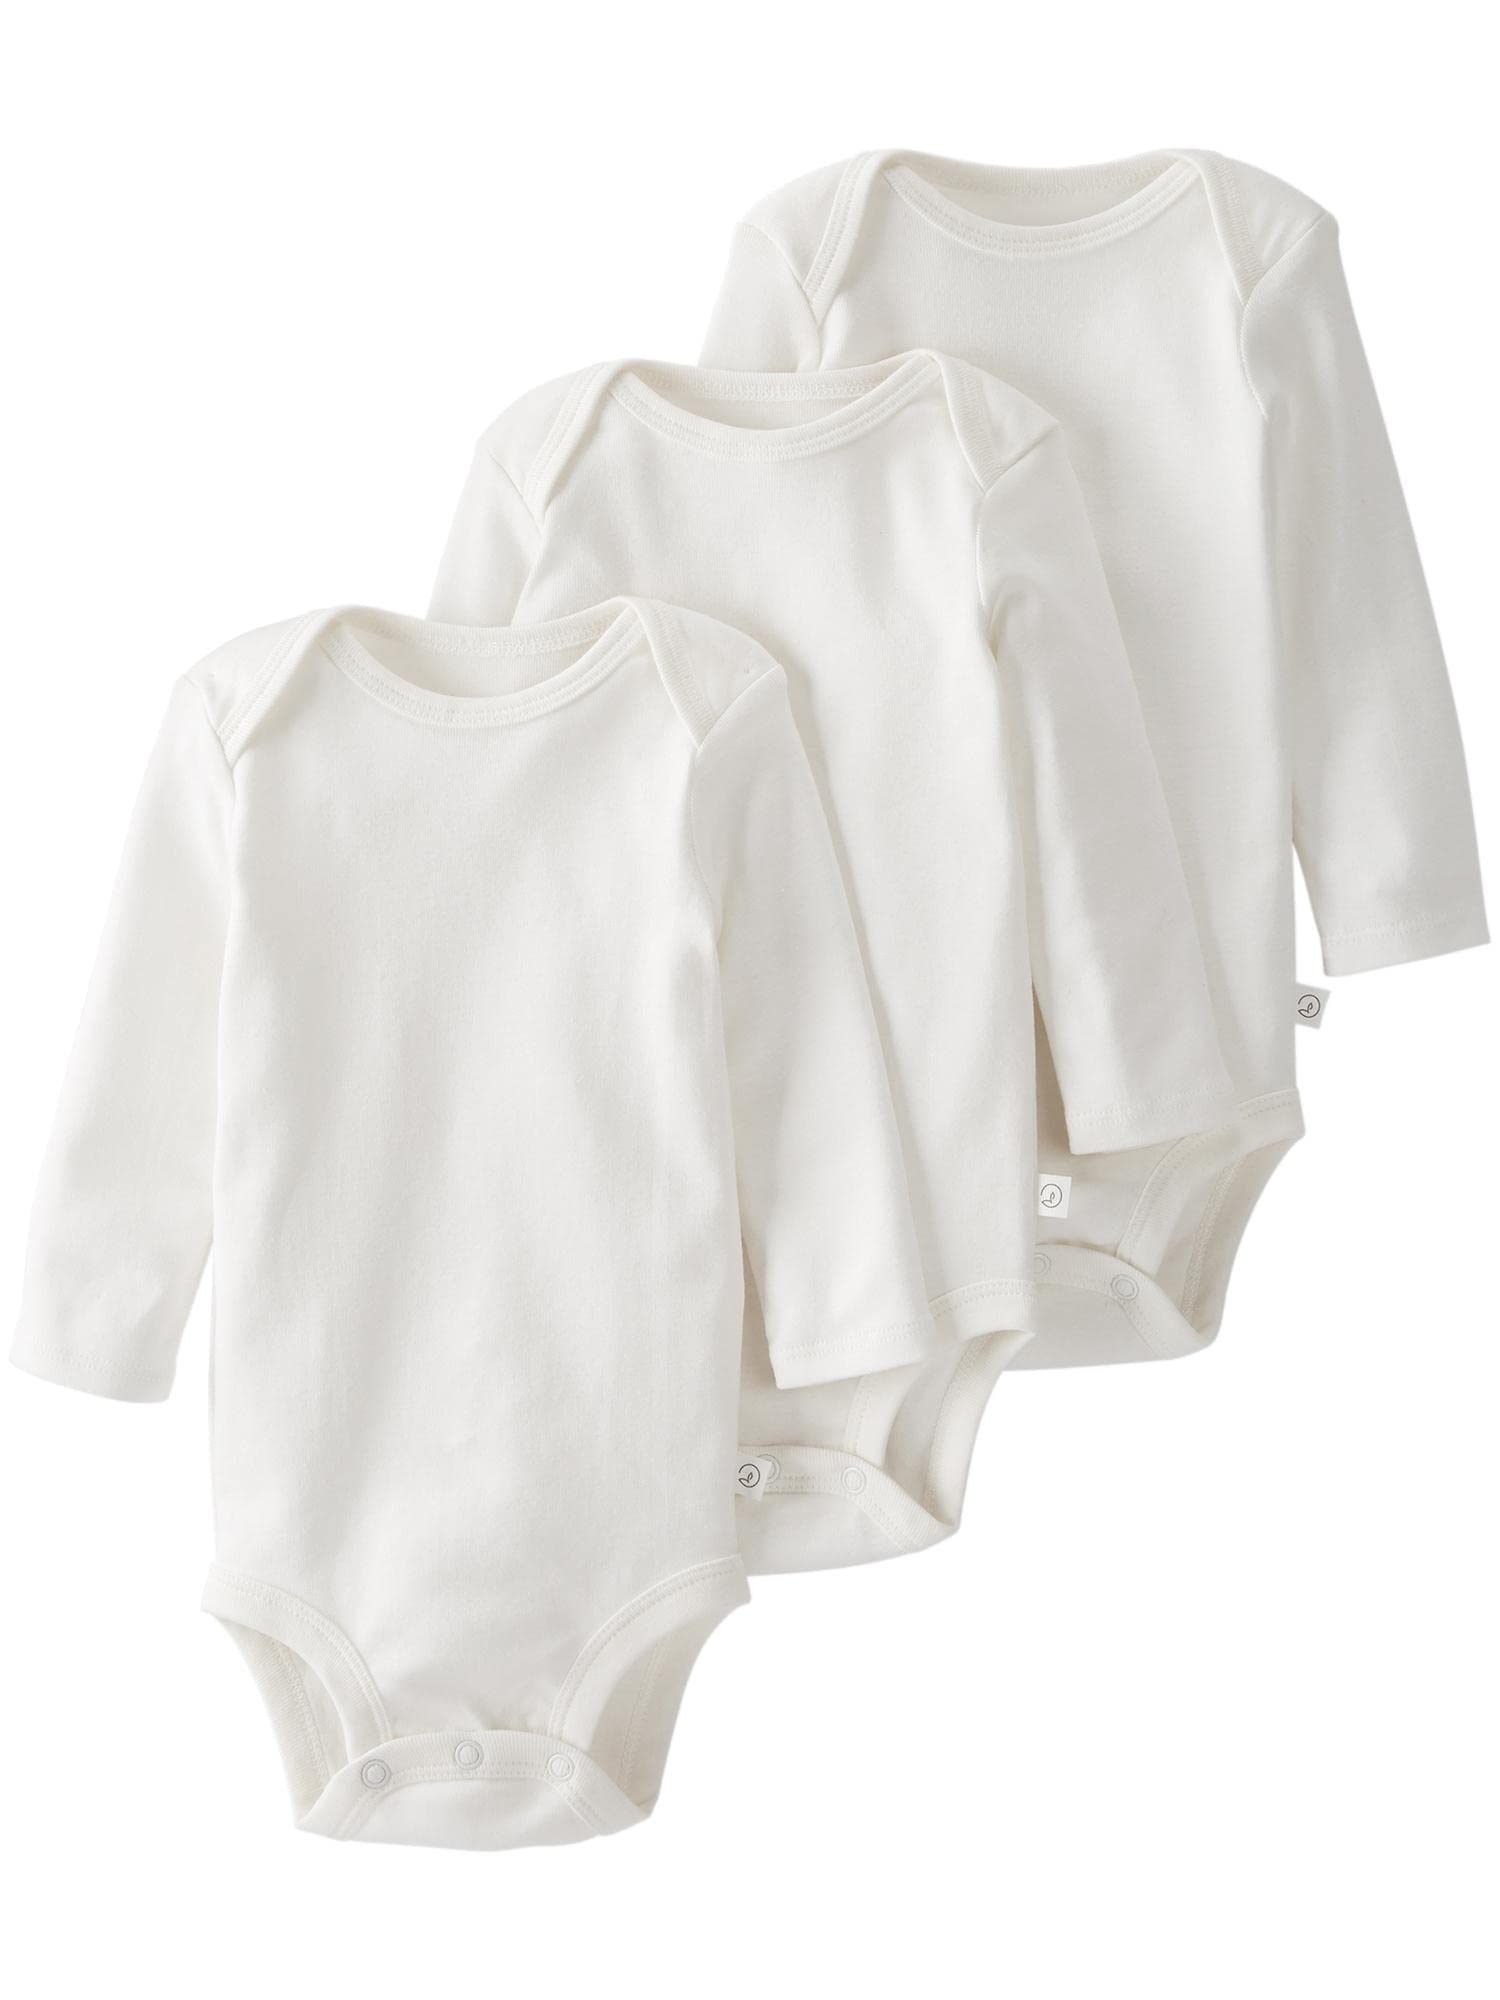 Little Planet By Carter's Baby 3-Pack Organic Cotton Rib Bodysuits